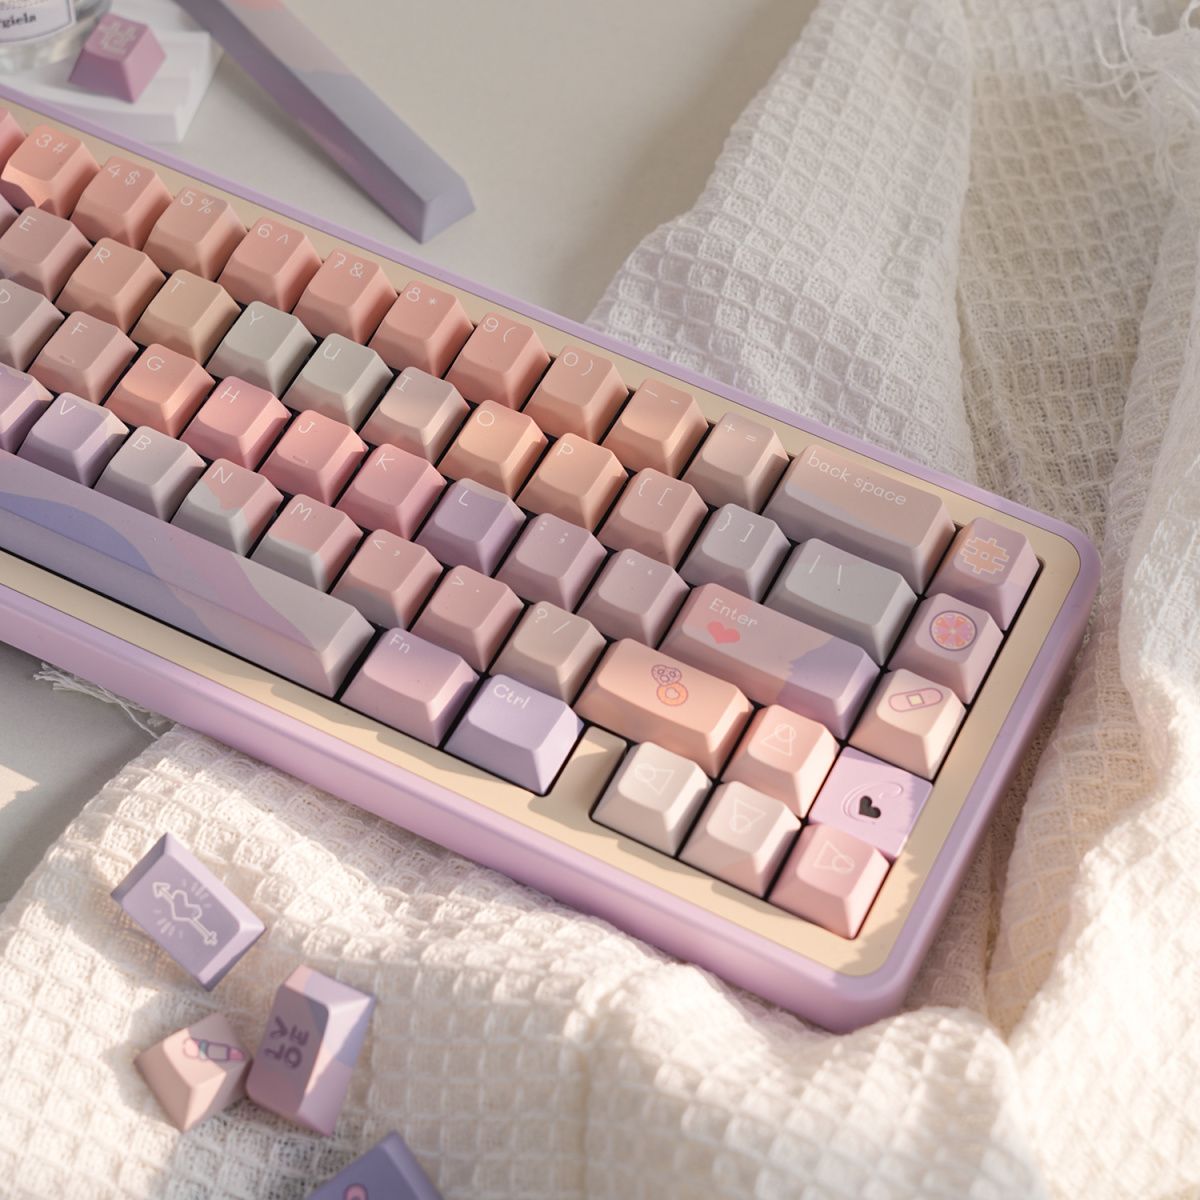 Dopamine Style Keycap Kit Pink Pink Cherry Profile Key Caps PBT Material Gift for Friends